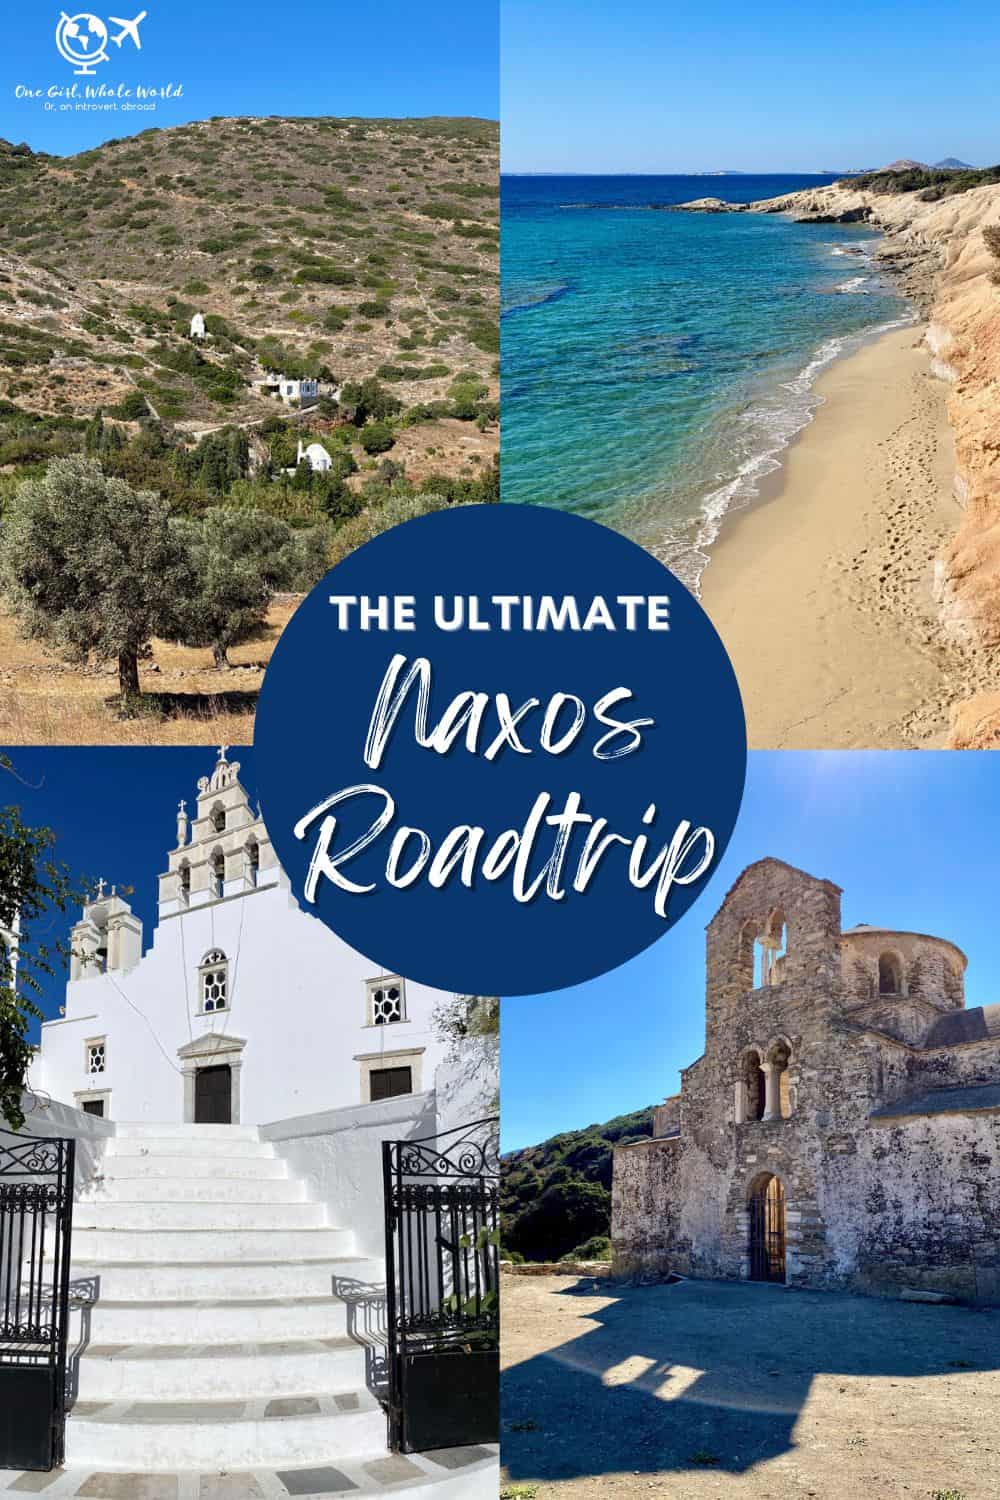 The Ultimate Roadtrip Guide to Naxos, Greece: What to See & Do | The bigger, chiller island of Naxos provides a great contrast to touristy Santorini & Mykonos. It's got 4,000 years of history & cultures, a great foodie scene, more greenery, ancient mountain villages, sparkling beaches, & more! Here's a detailed guide to planning a Naxos itinerary, including how to get there, where to stay, getting around, & all the things to do in Naxos. #greekislands #naxos #visitgreece